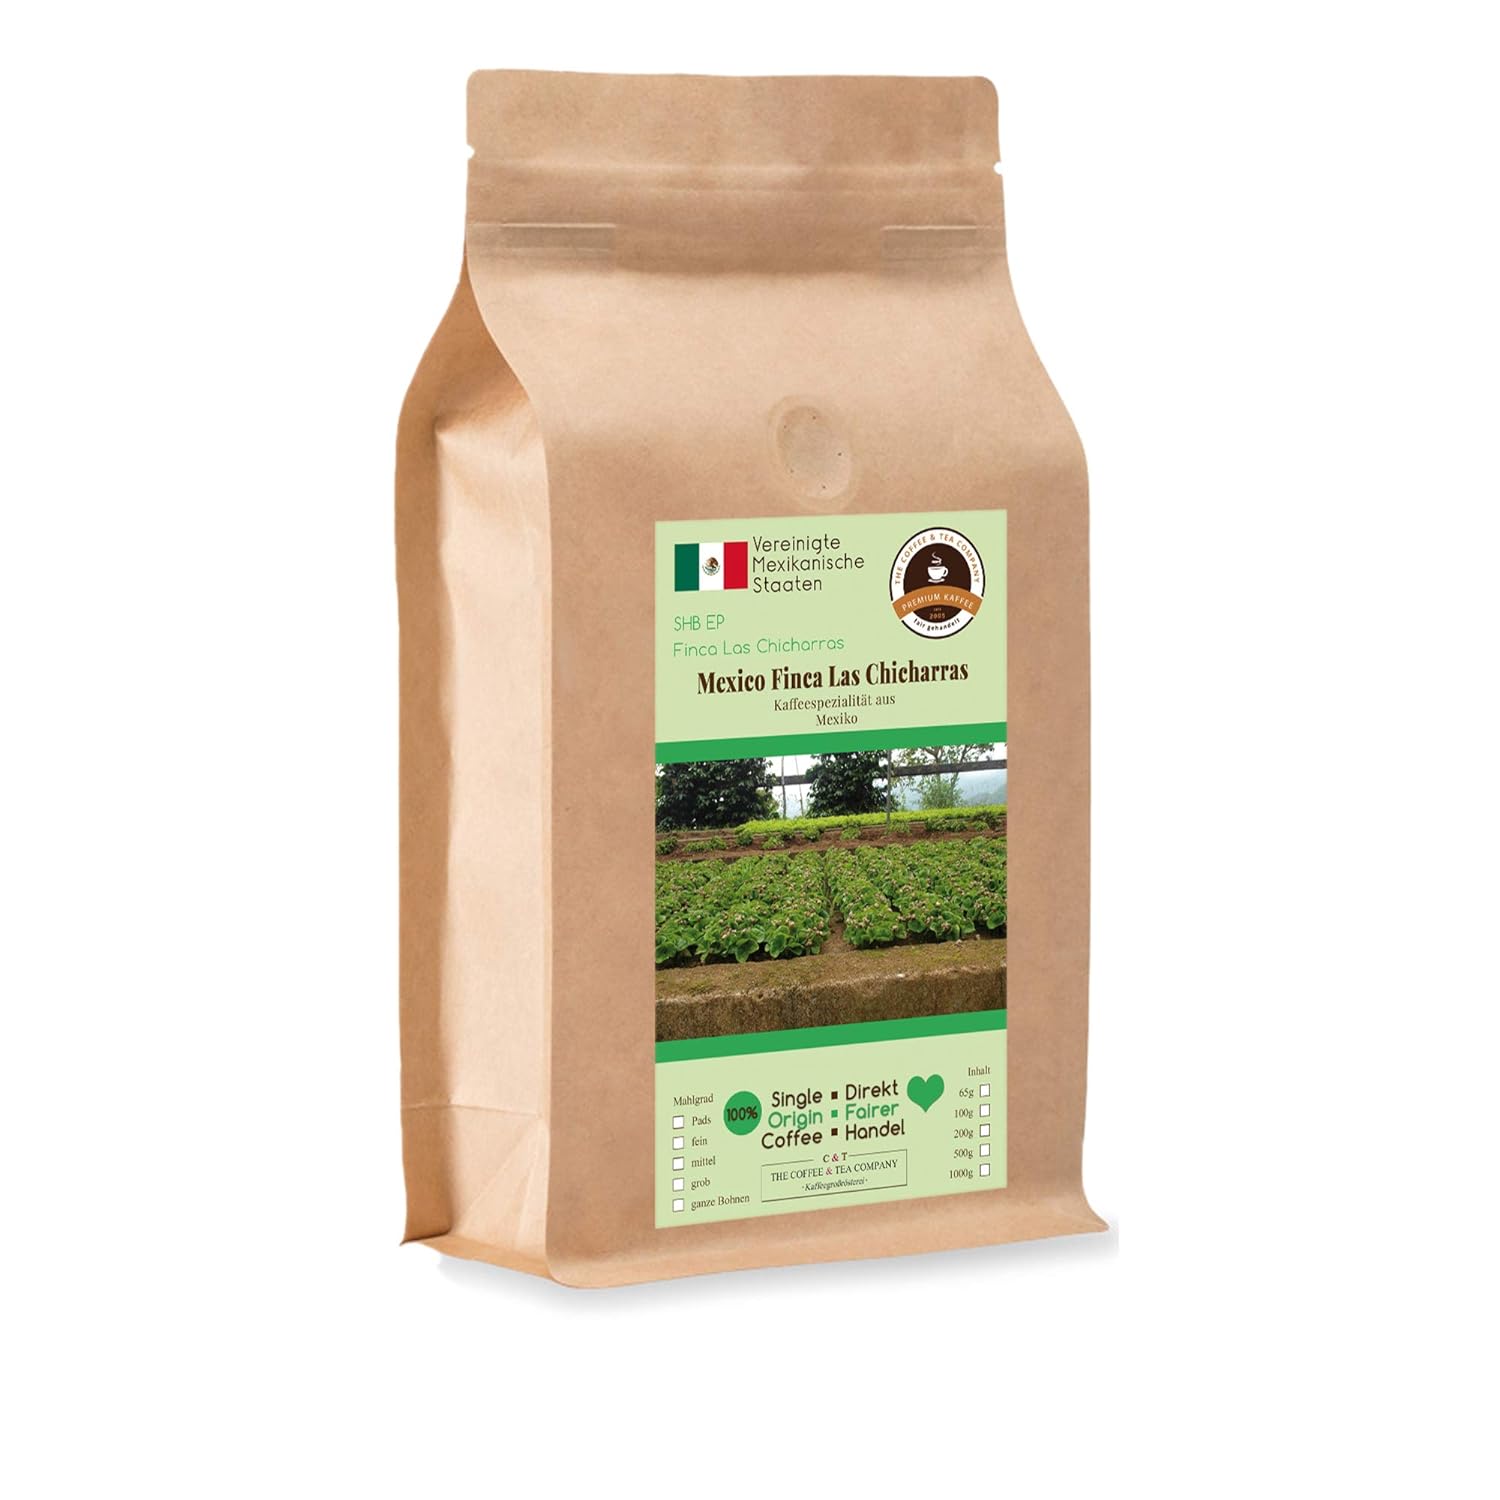 Coffee Globetrotter - Coffee with Heart - Mexico Finca Las Chicharras - 200 g Medium Ground - for Coffee Filter Machine, Hand Filter - Top Coffee Fair Trade Supports Social Projects